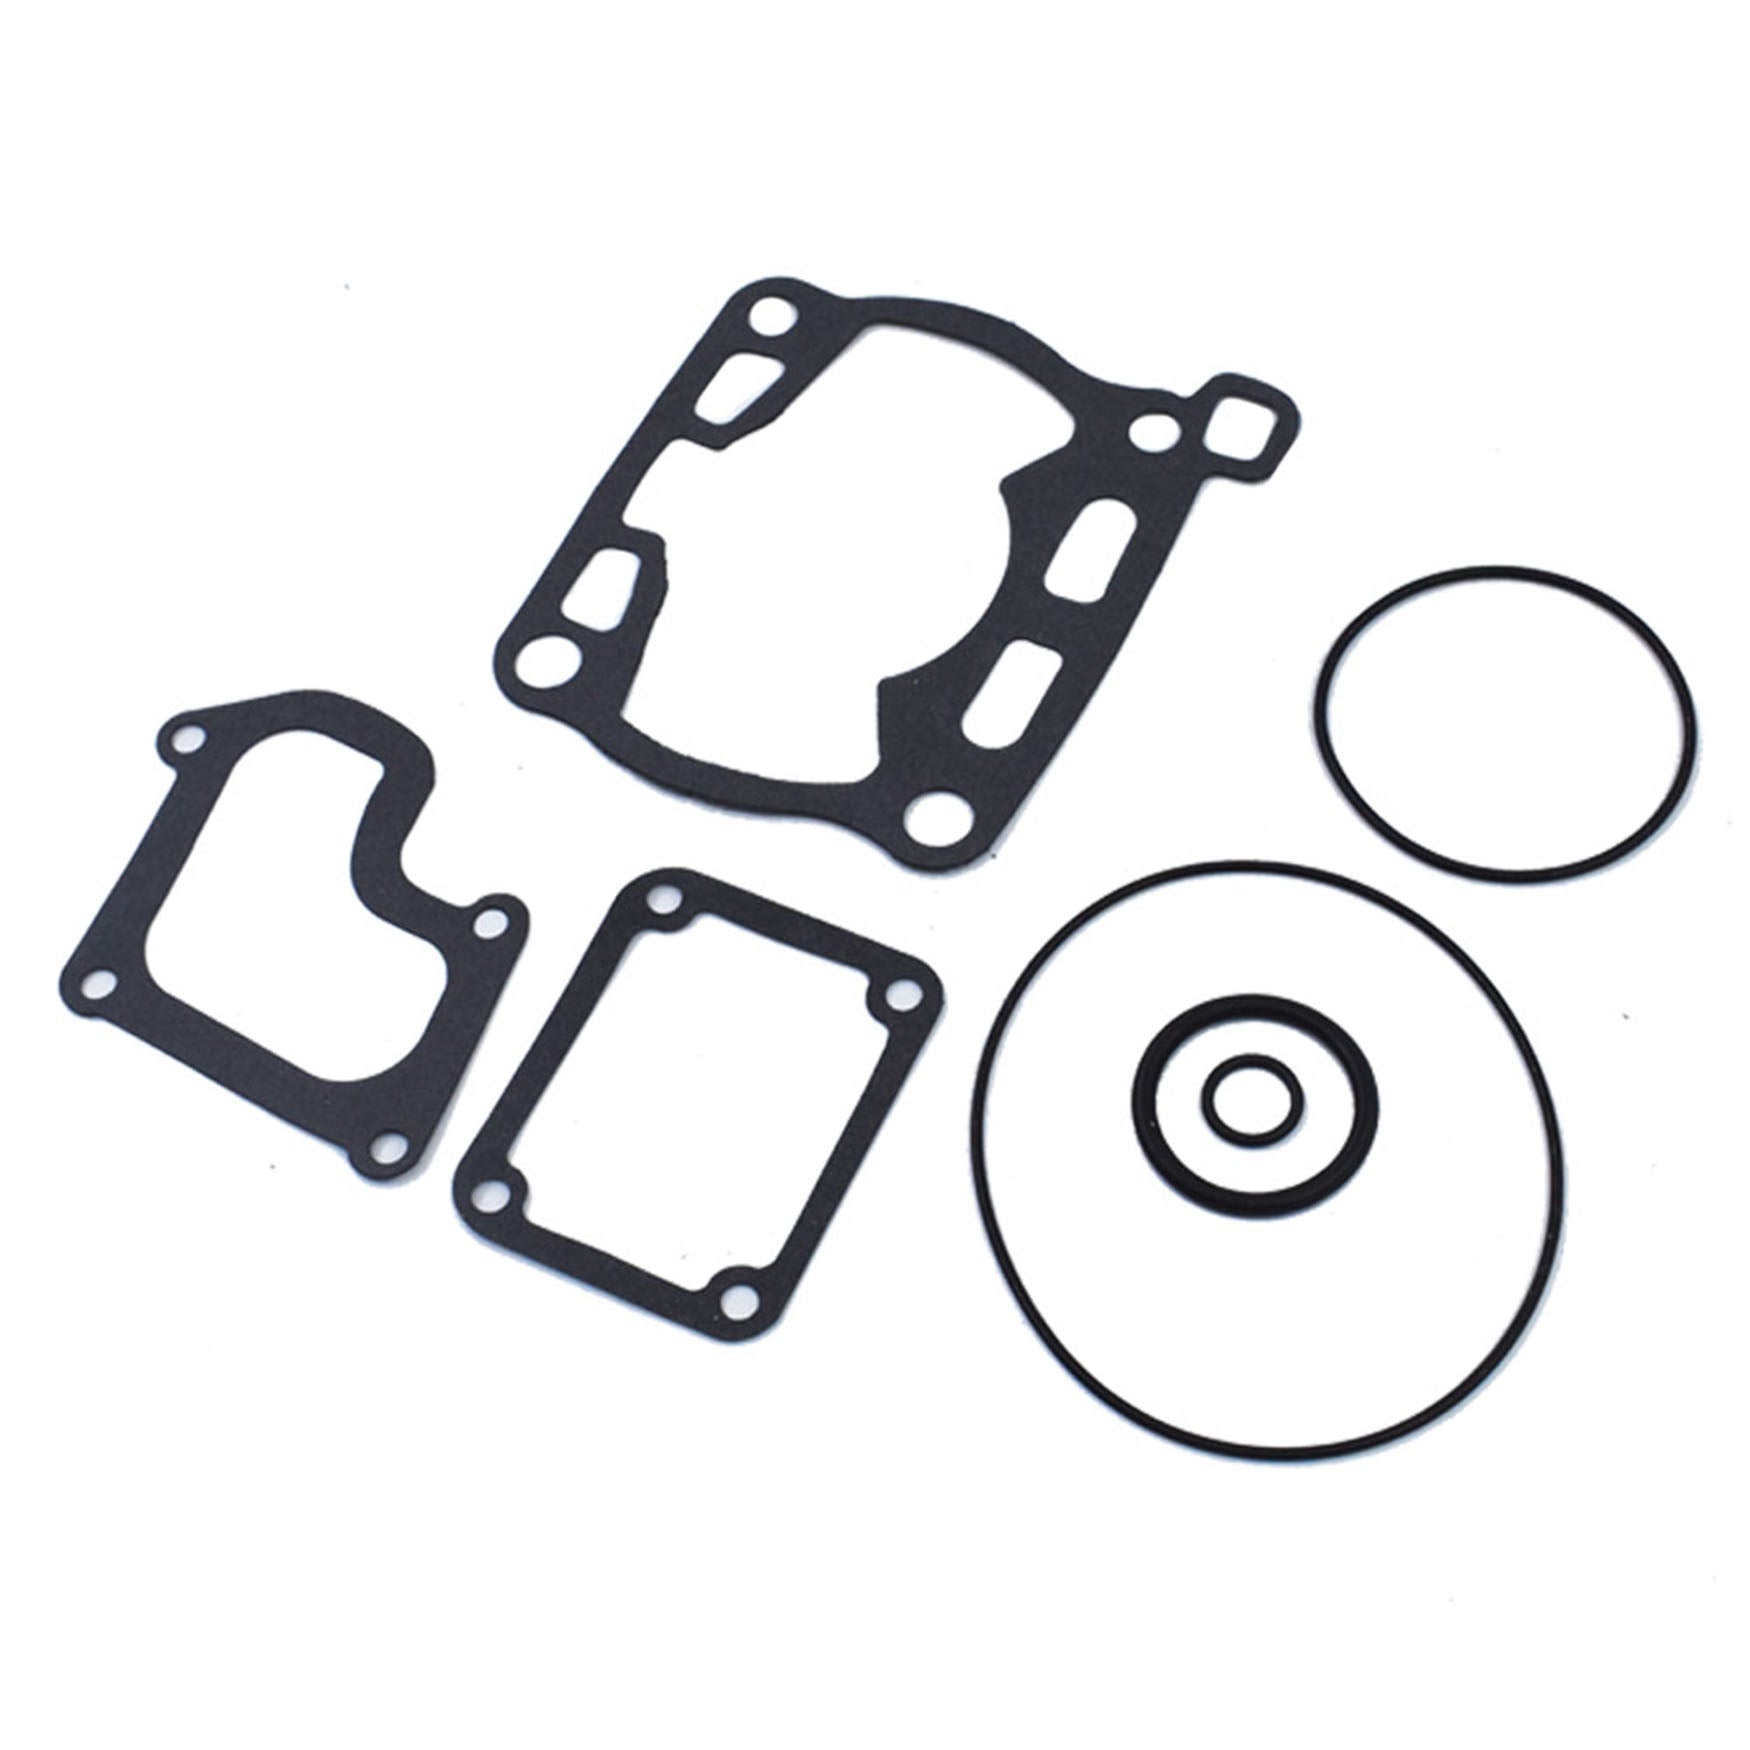 Autoparts New Top End Head Gasket Kit Fit for Suzuki RM125 1998 1999 2000 2001 2002